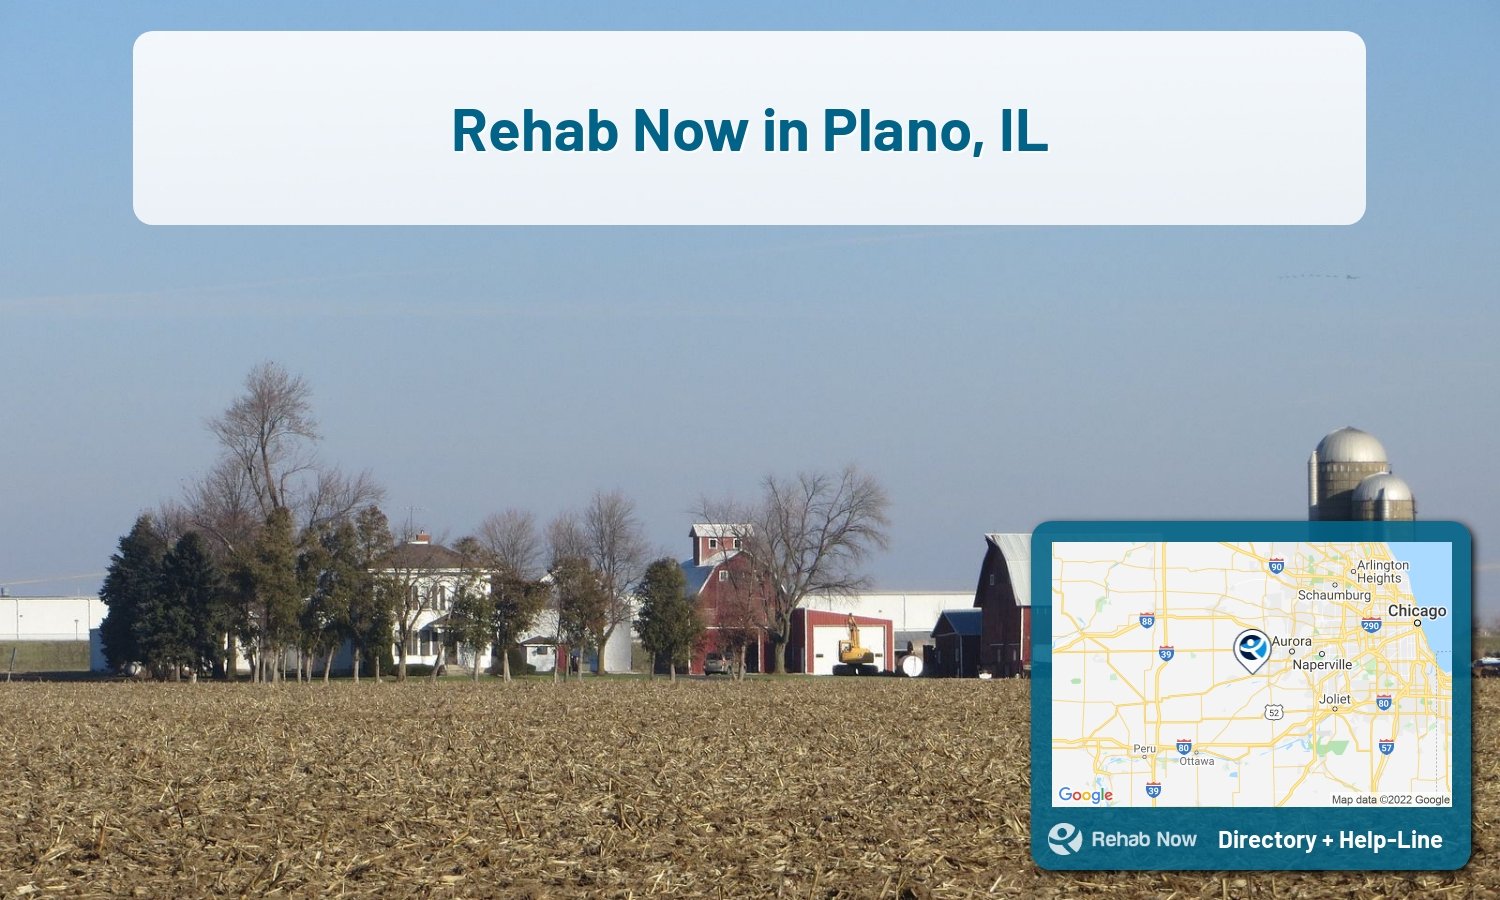 Our experts can help you find treatment now in Plano, Illinois. We list drug rehab and alcohol centers in Illinois.